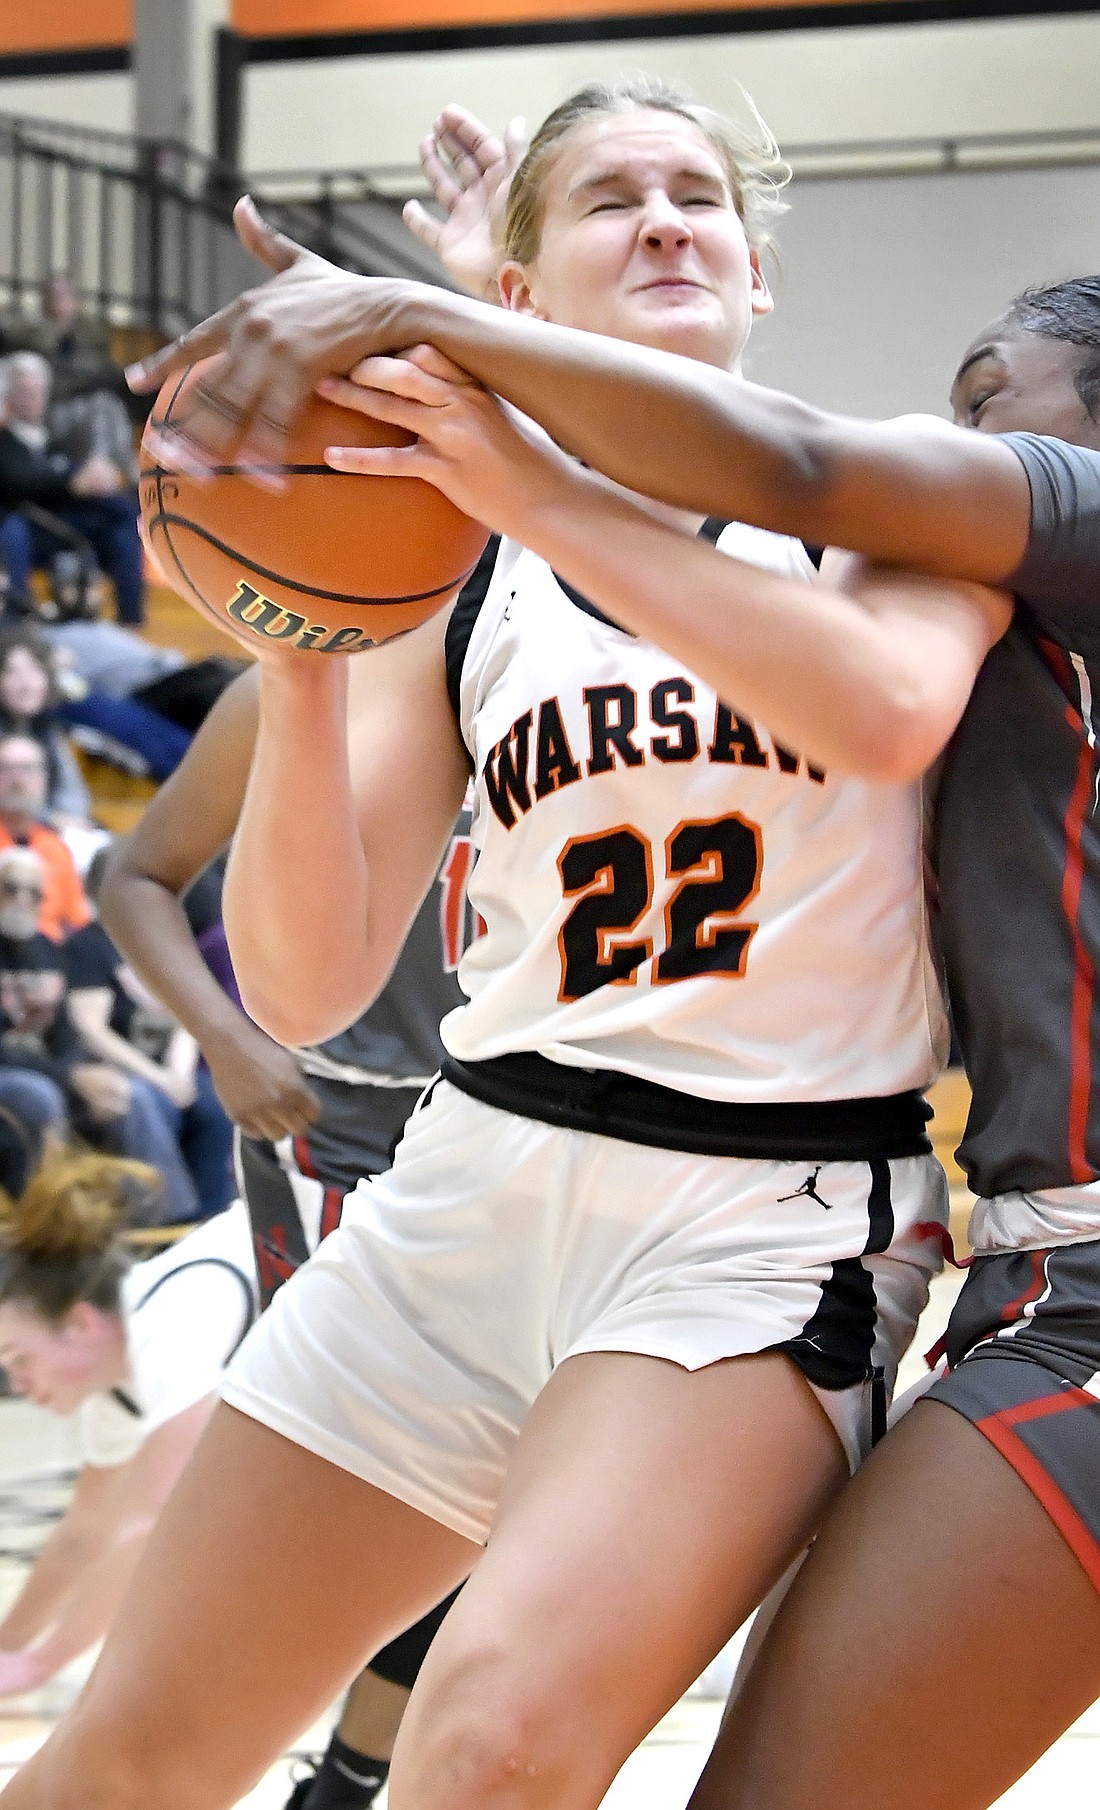 Junior Brooke Winchester of Warsaw takes a hard foul while working under the basket in the first quarter. Photo by Gary Nieter